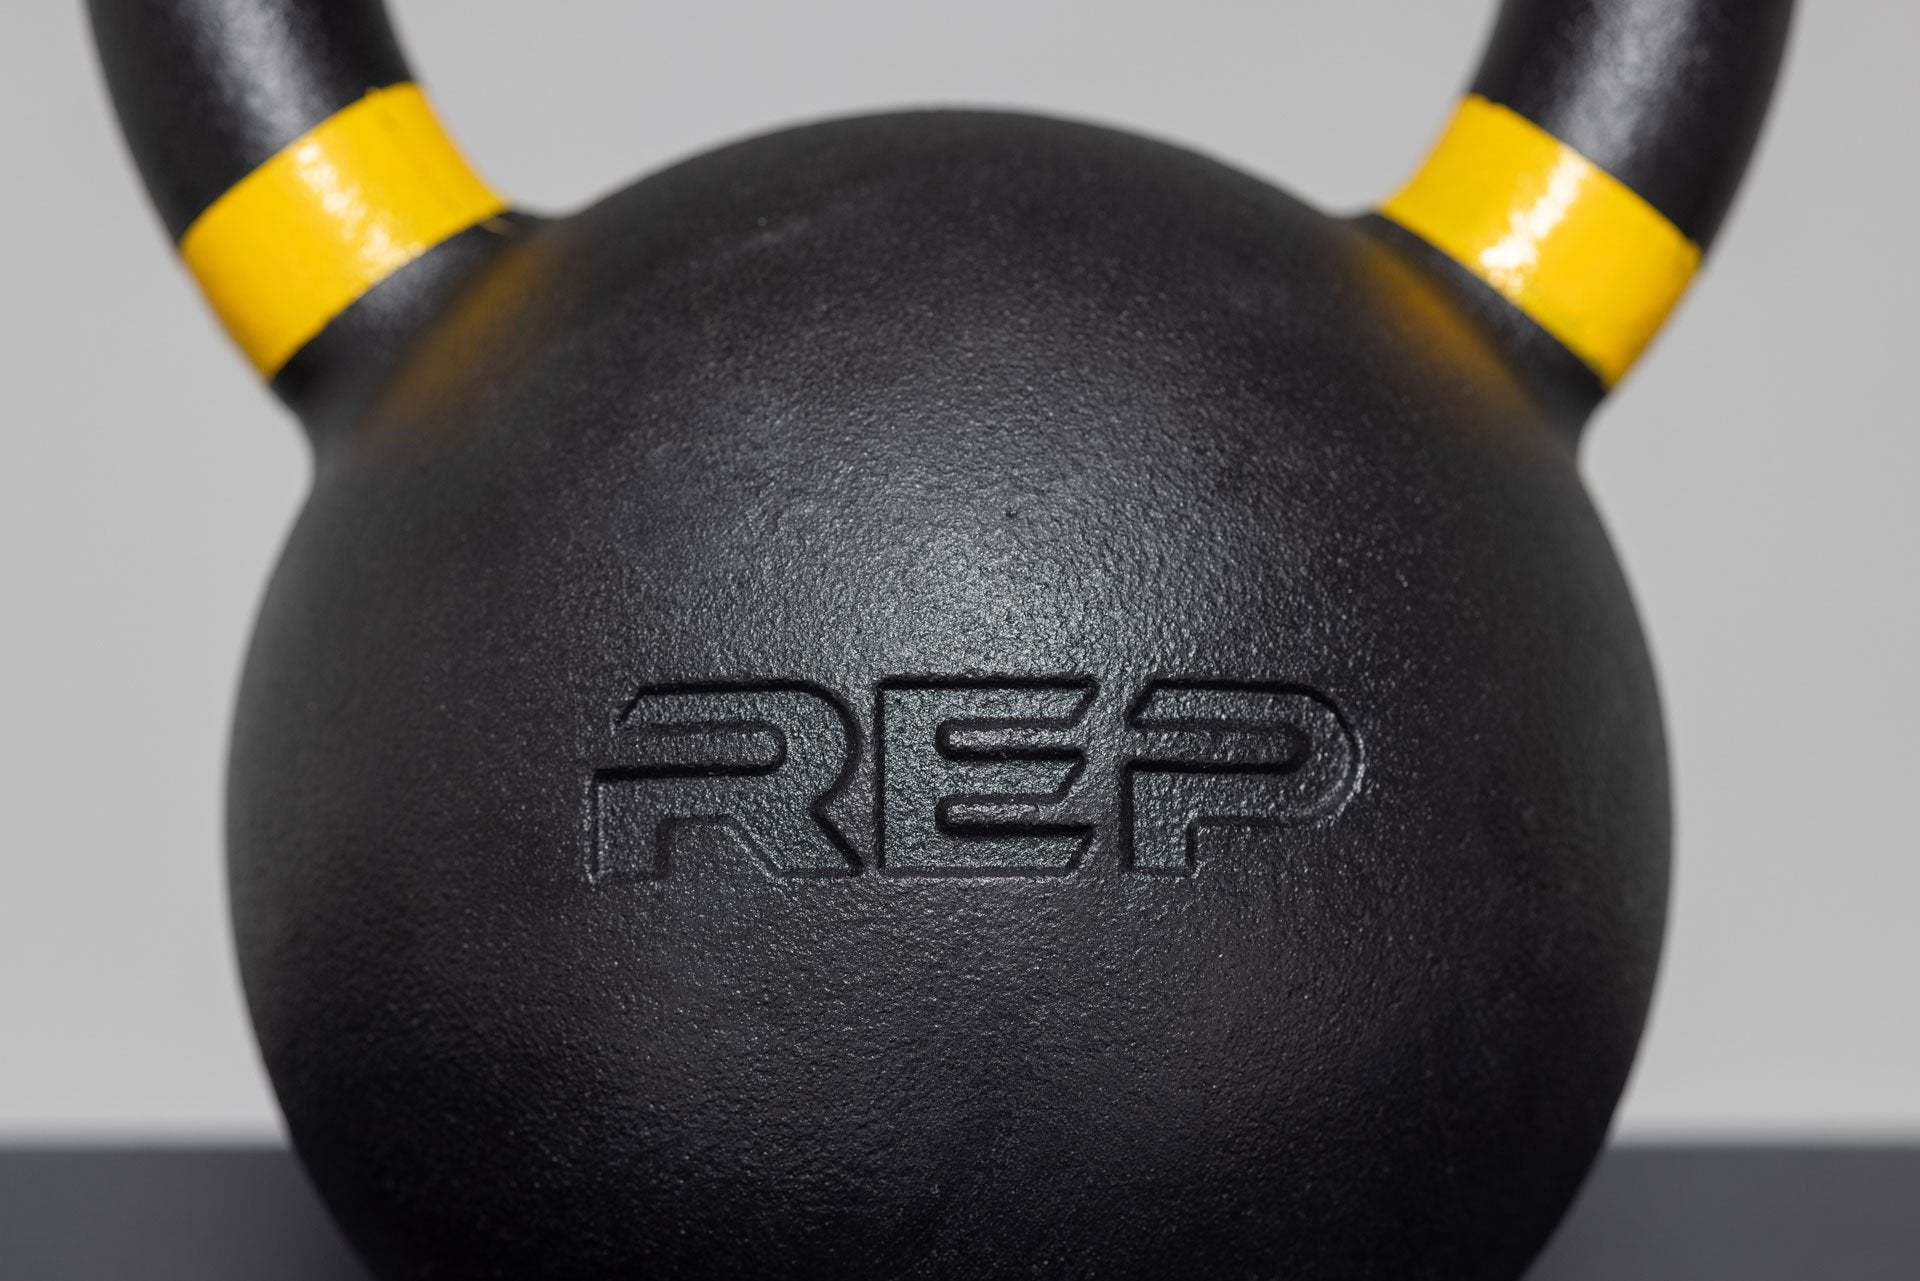 Mad Fitness Kettlebell - 20kg only £92.00